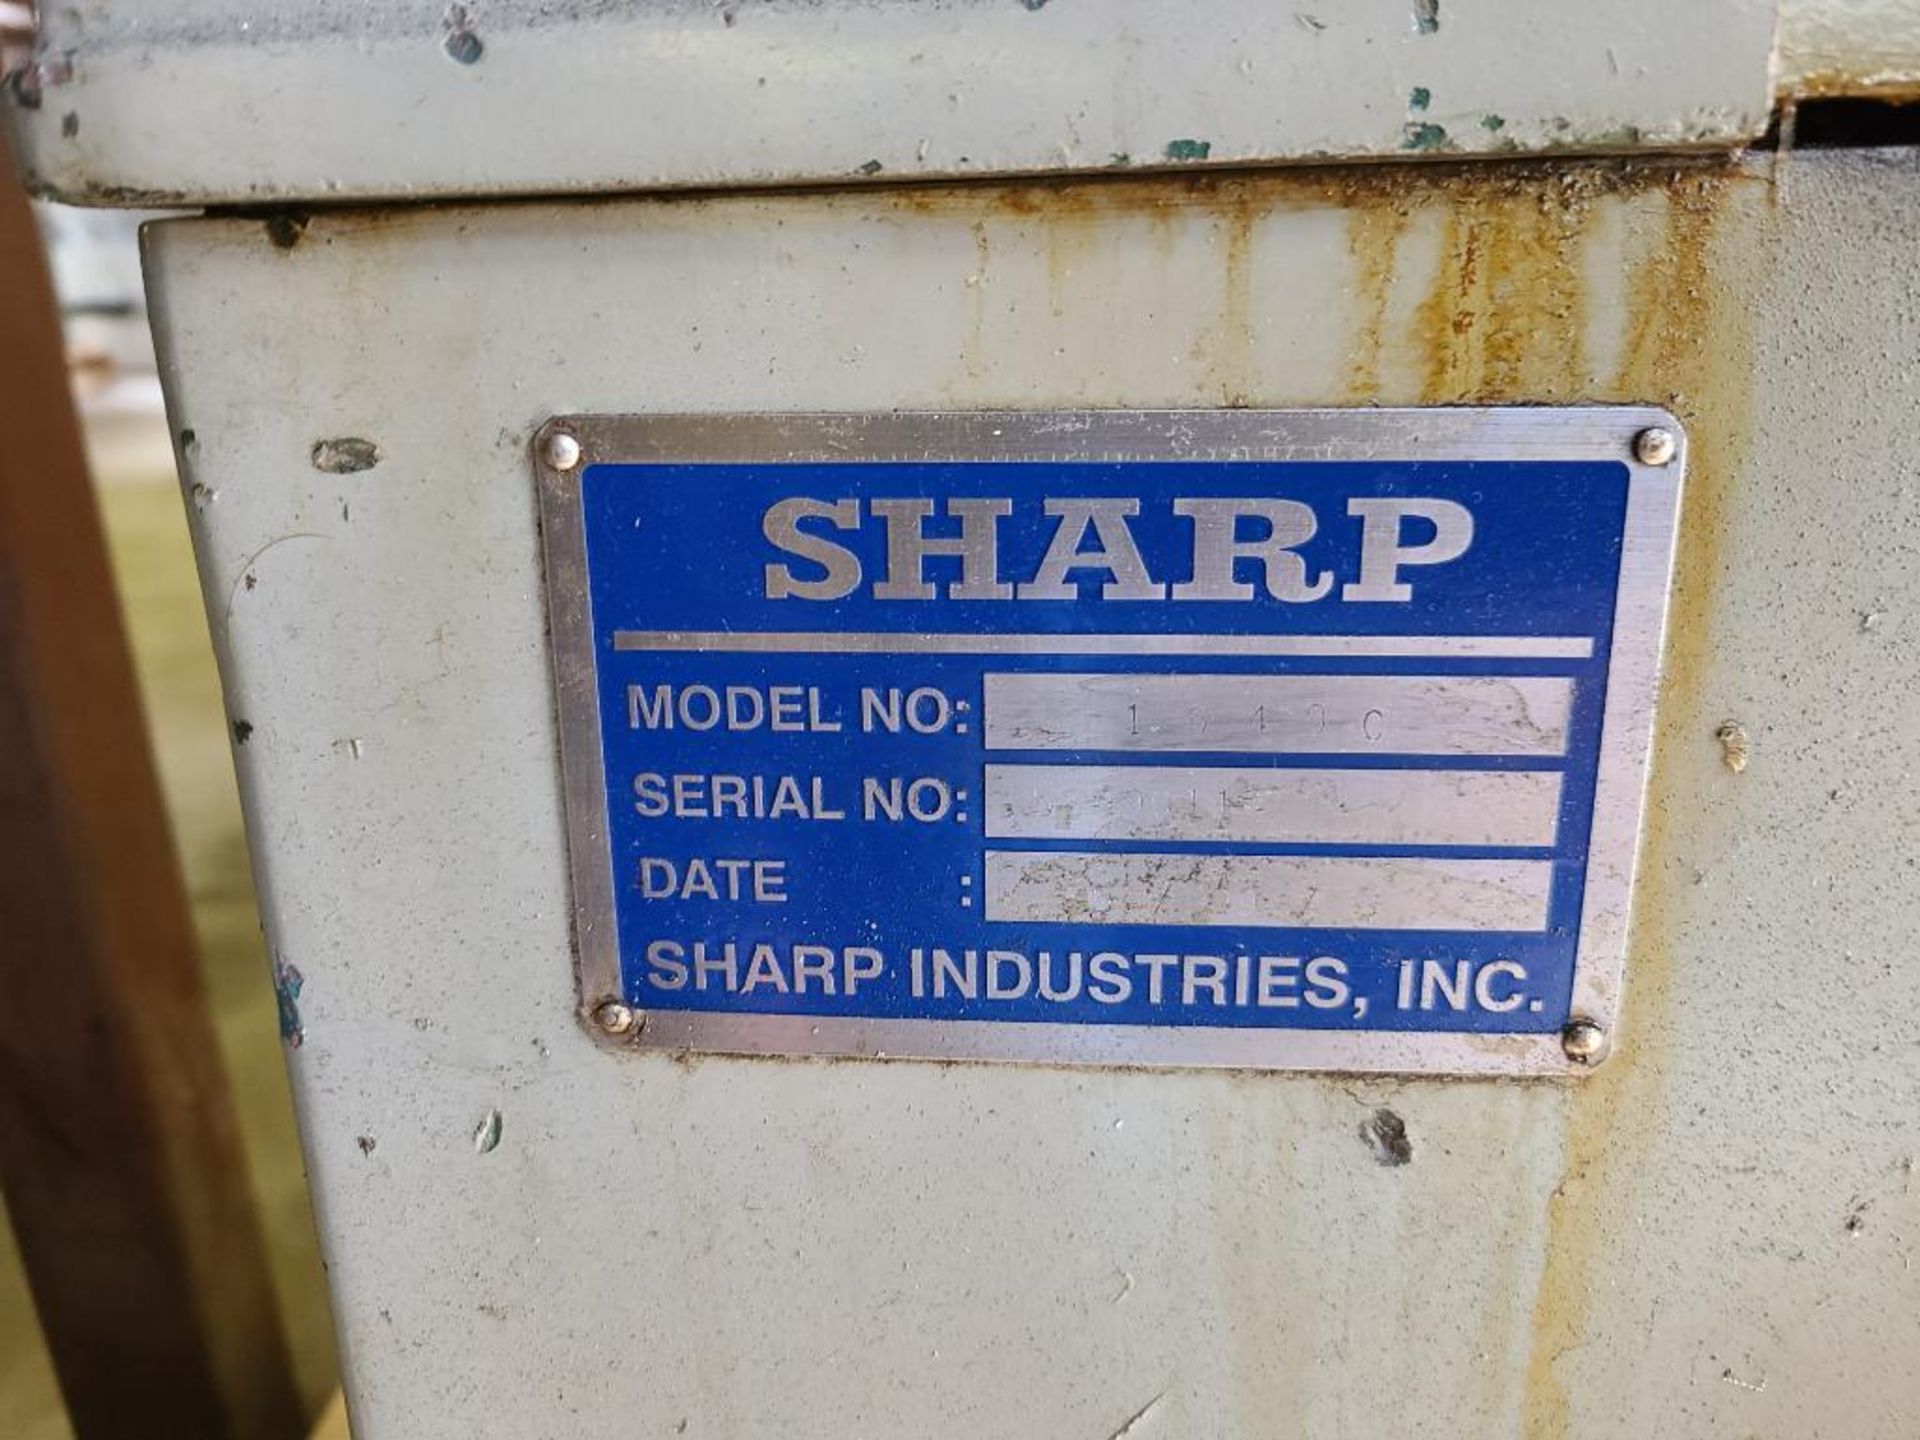 2003 Sharp 1640 Engine Lathe with Digital Readout - Image 3 of 6